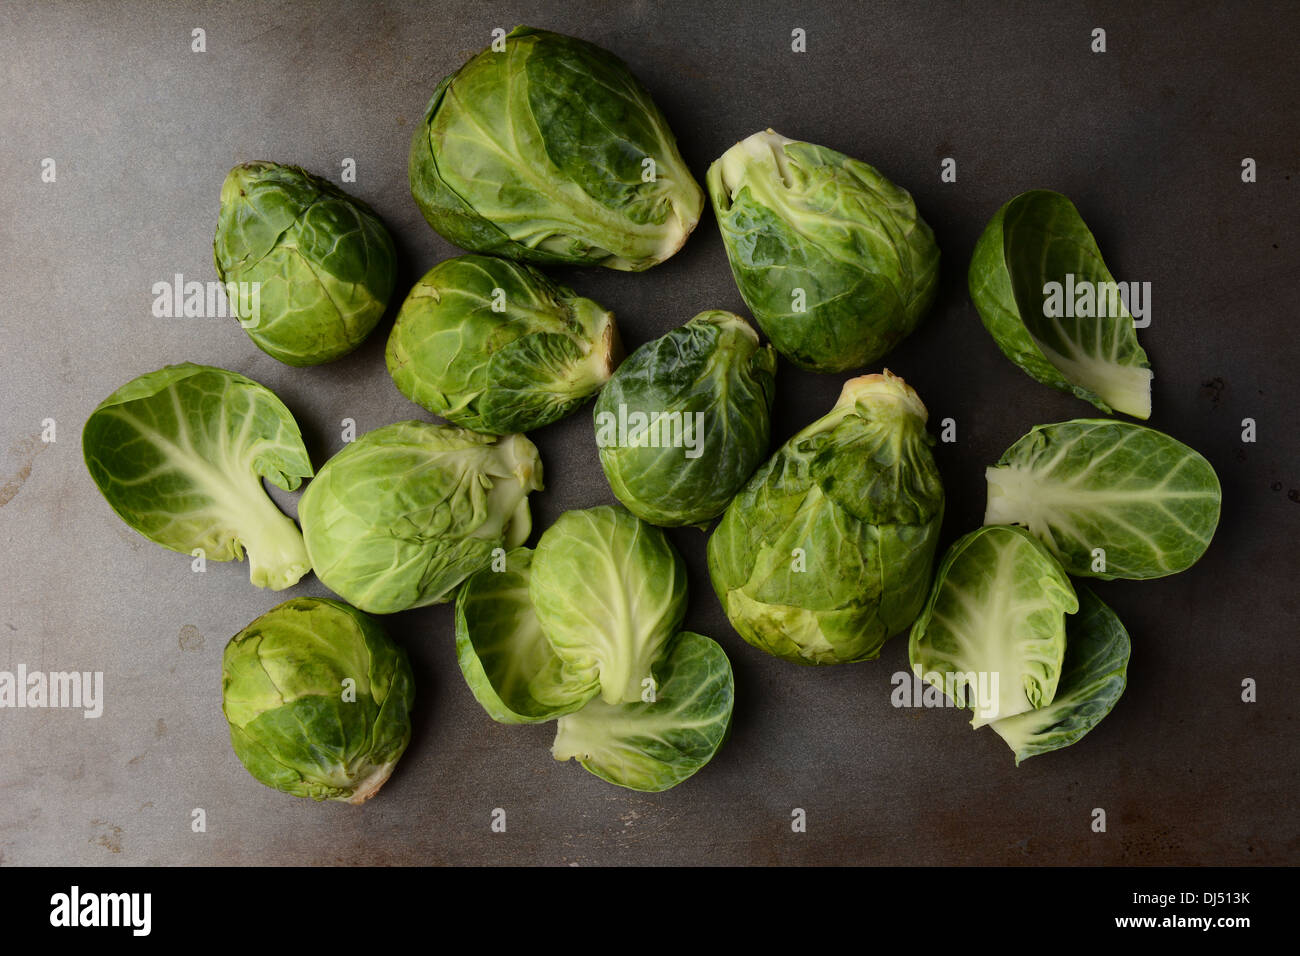 Fresh picked Brussels Sprouts arranged on a metal cooking sheet. Horizontal format. Stock Photo